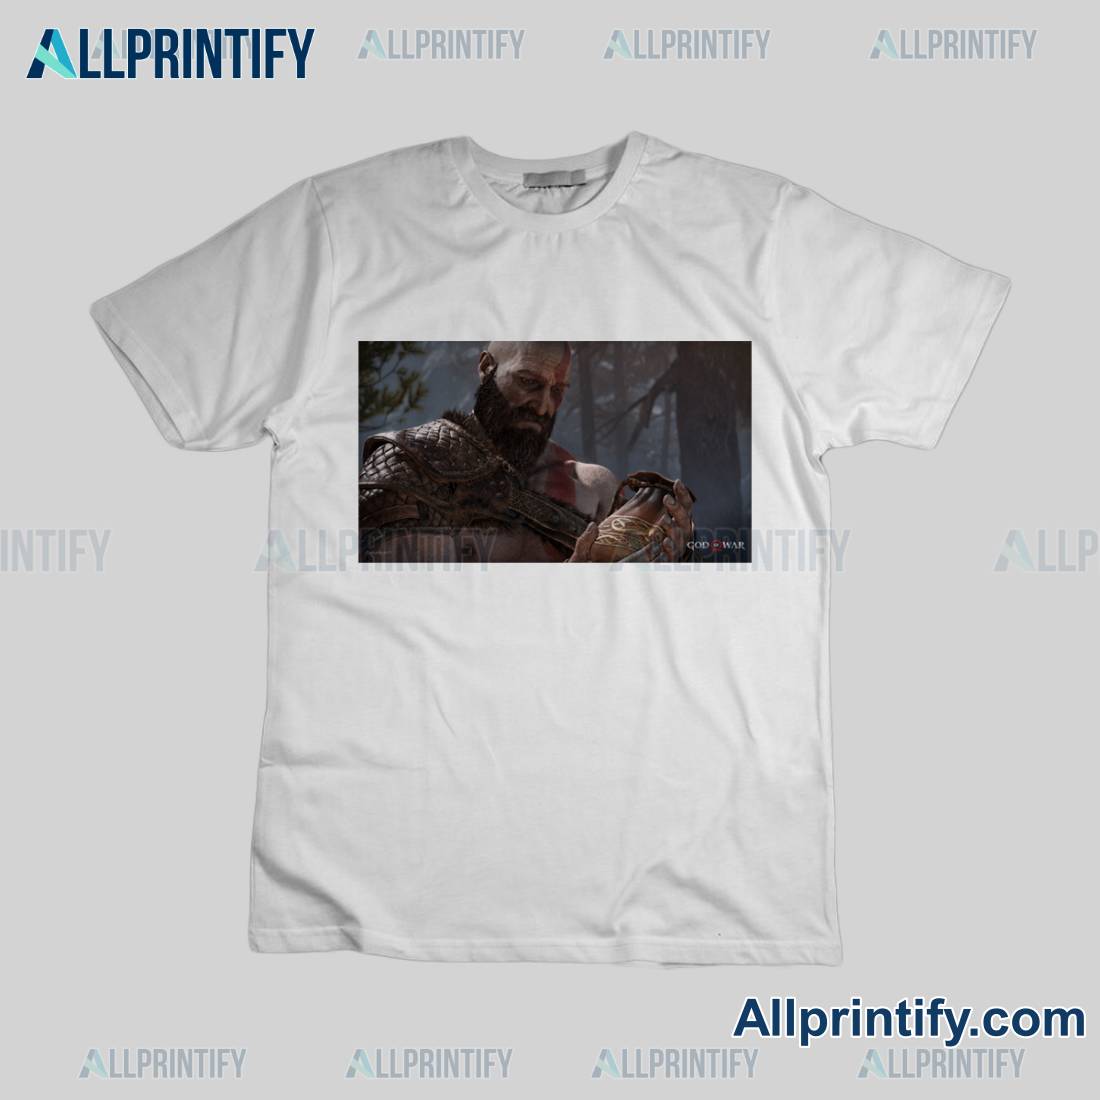 Kratos Learning To Heal From The Scorn And Pain And Chooses To Fight For The Better Of Others Than Anger Shirt